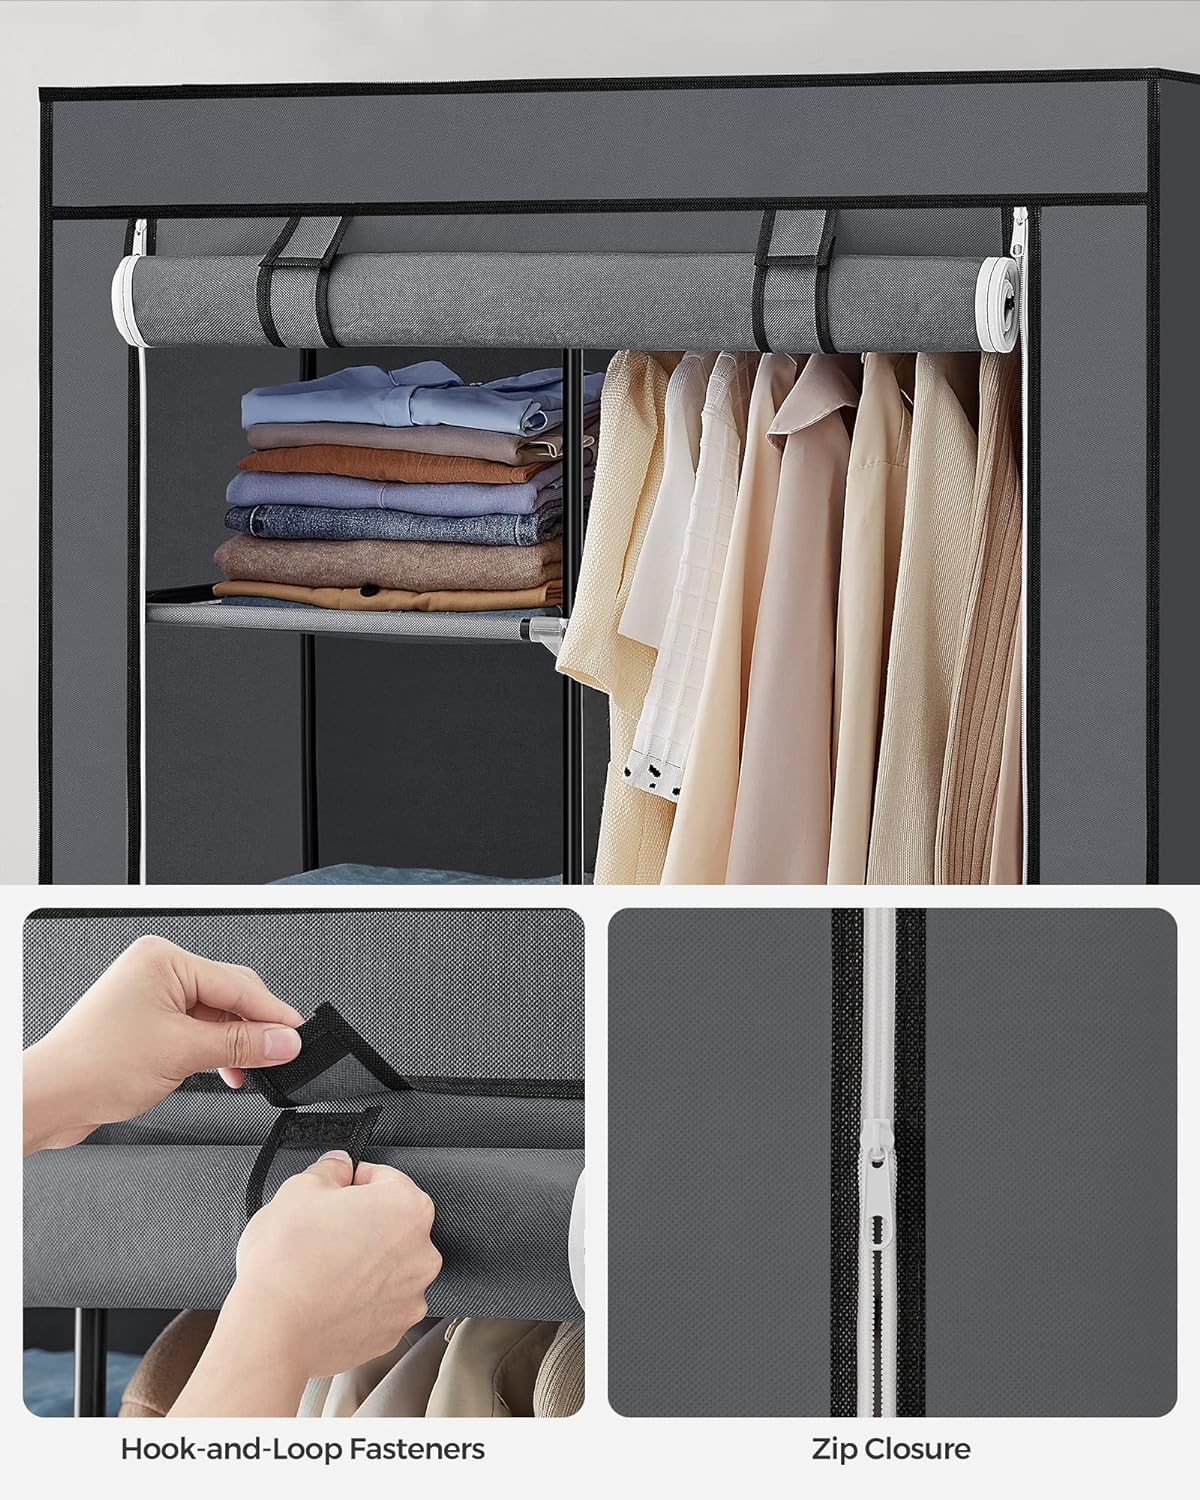 Portable Clothes Storage with 6 Shelves and 1 Clothes Hanging Rail - Grey